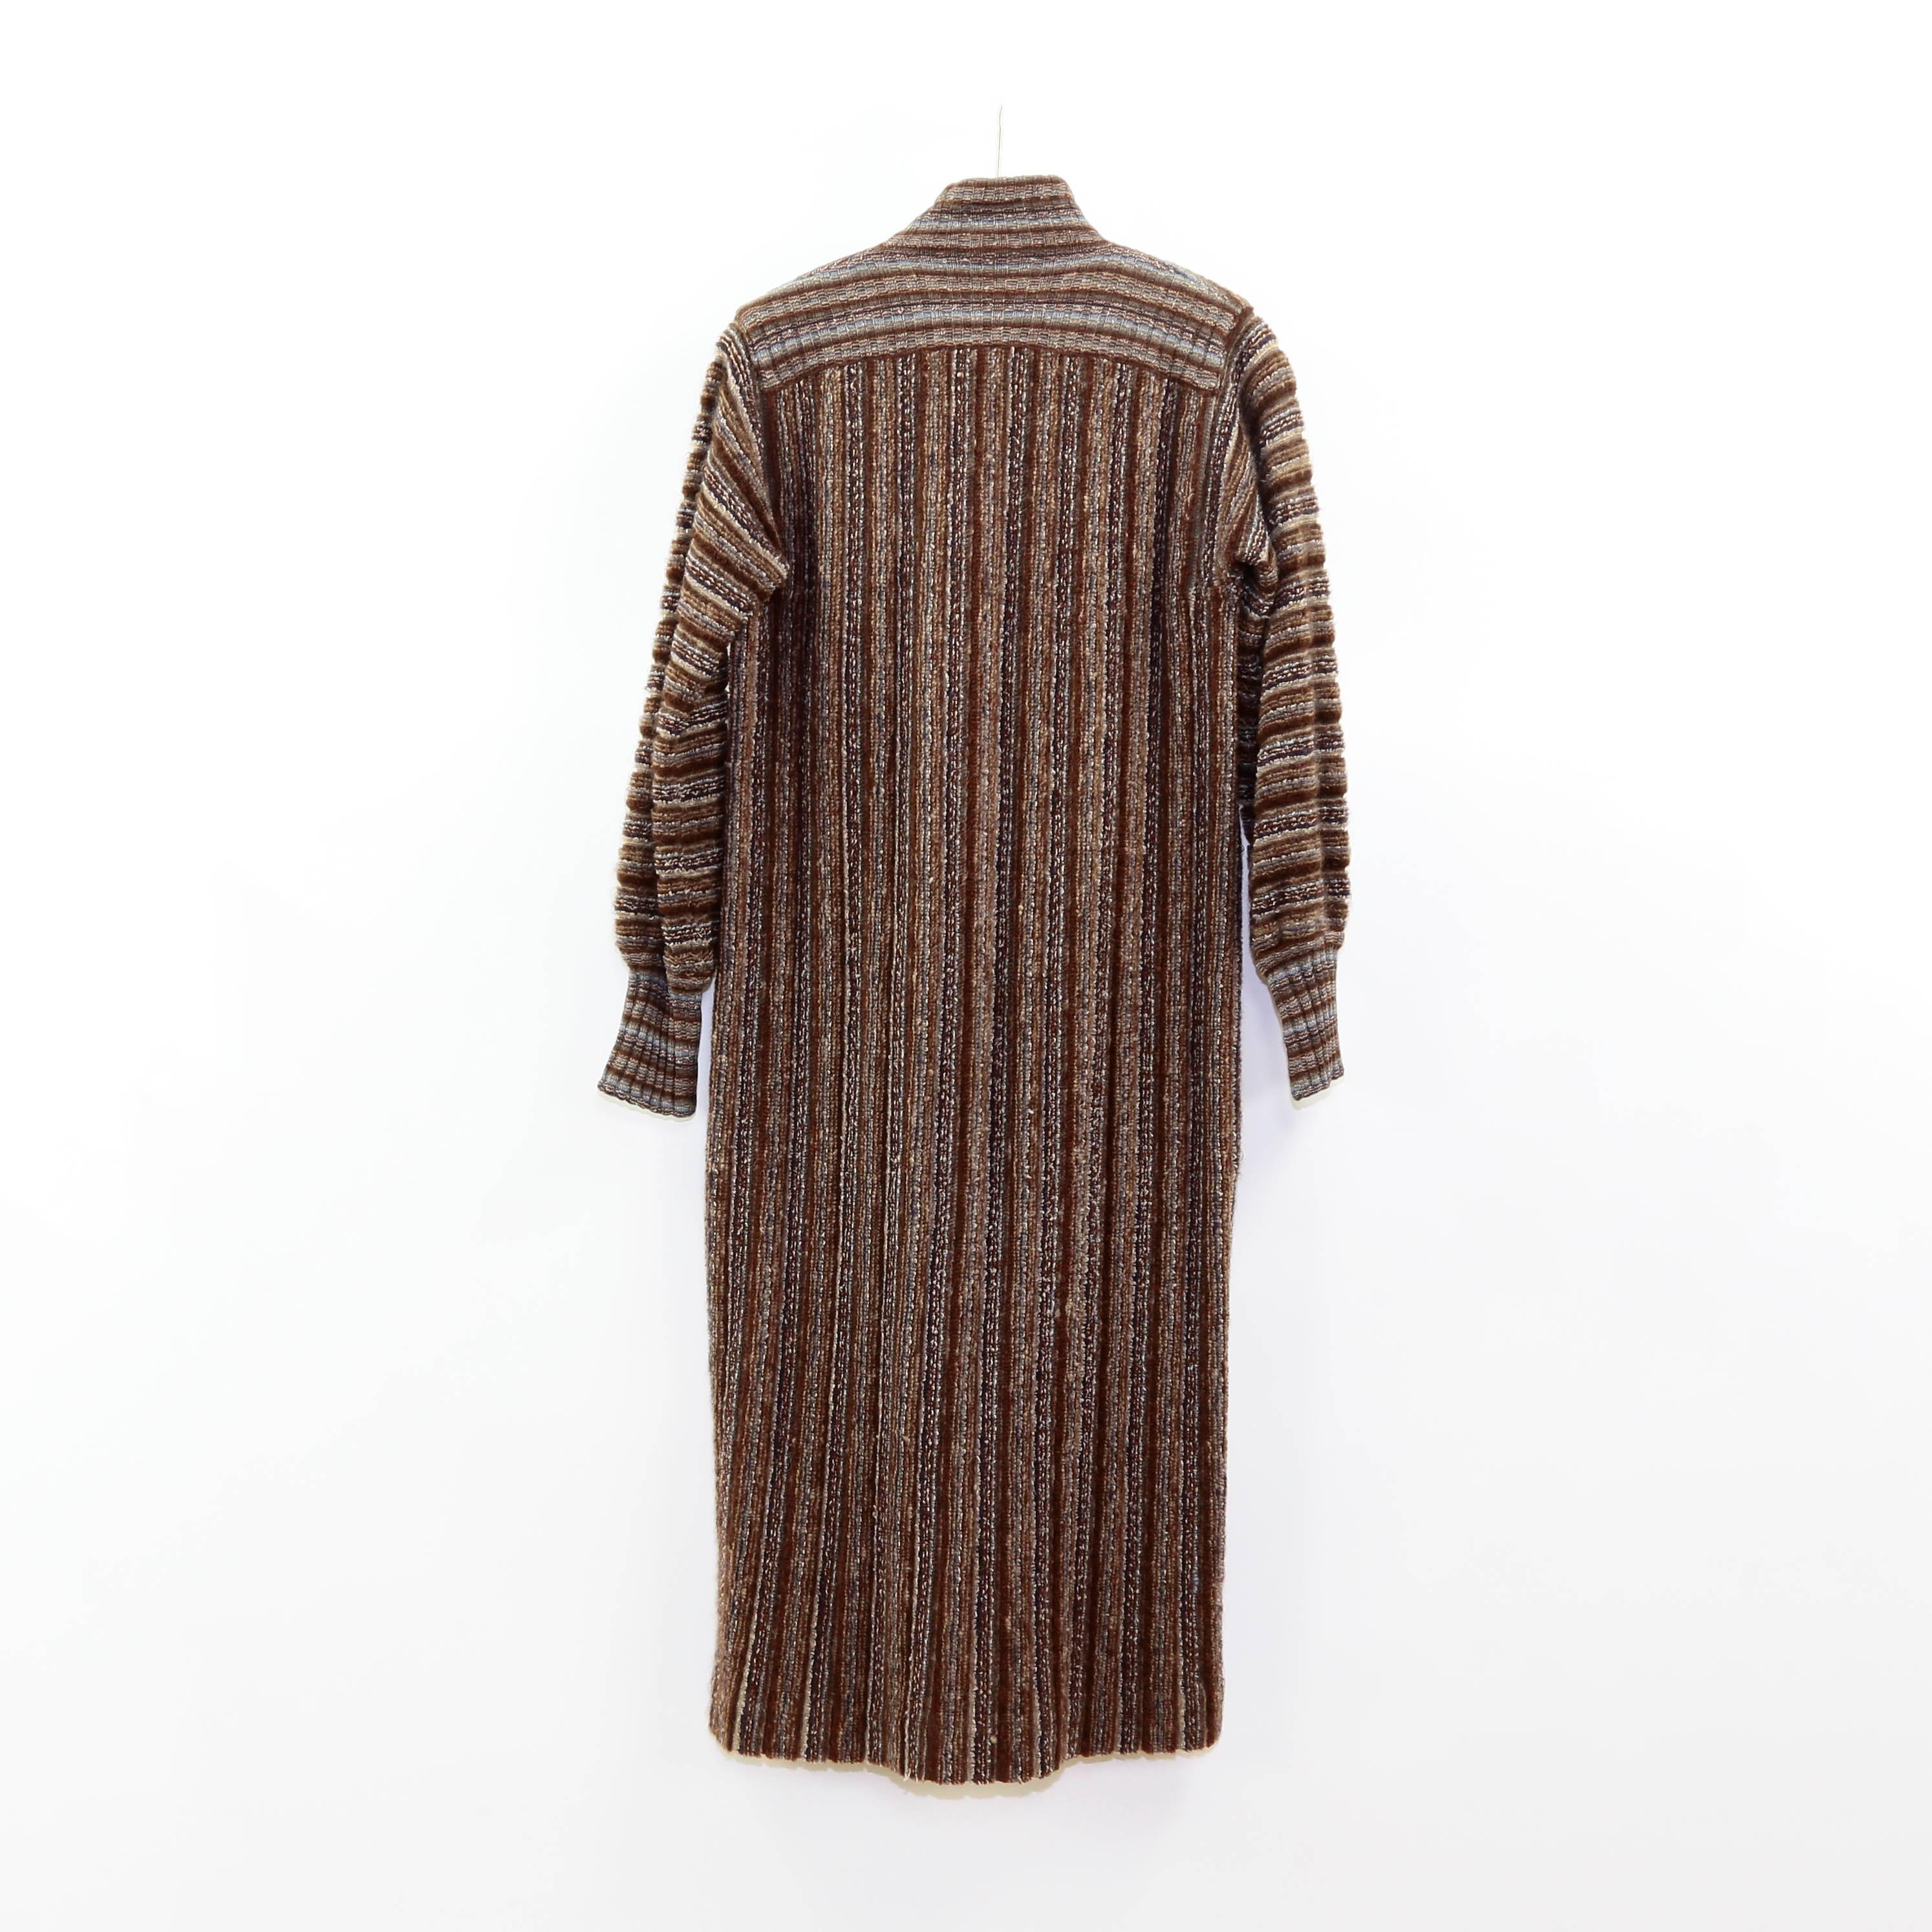 Missoni Woman's Long Striped Knit Italian virgin wool Coat; with striped brown, beige, cream, and blue knitted pattern throughout; Front button fastenings Fastens with covered buttons; 100% Pure New Wool. Perfect for fall and winter; A fabulous